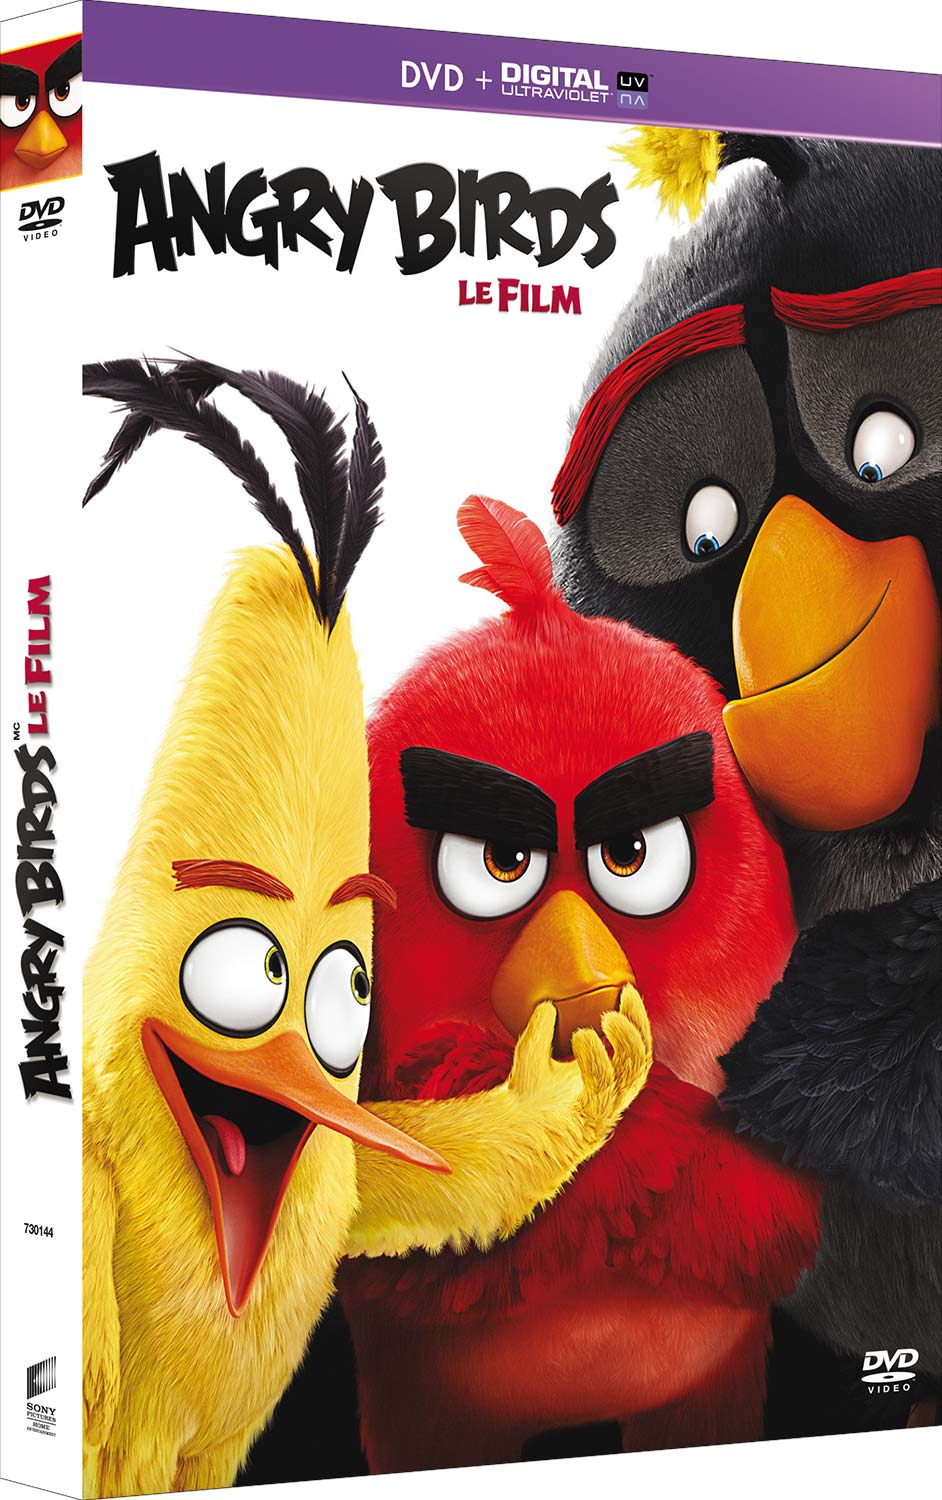 ANGRY BIRDS - DVD